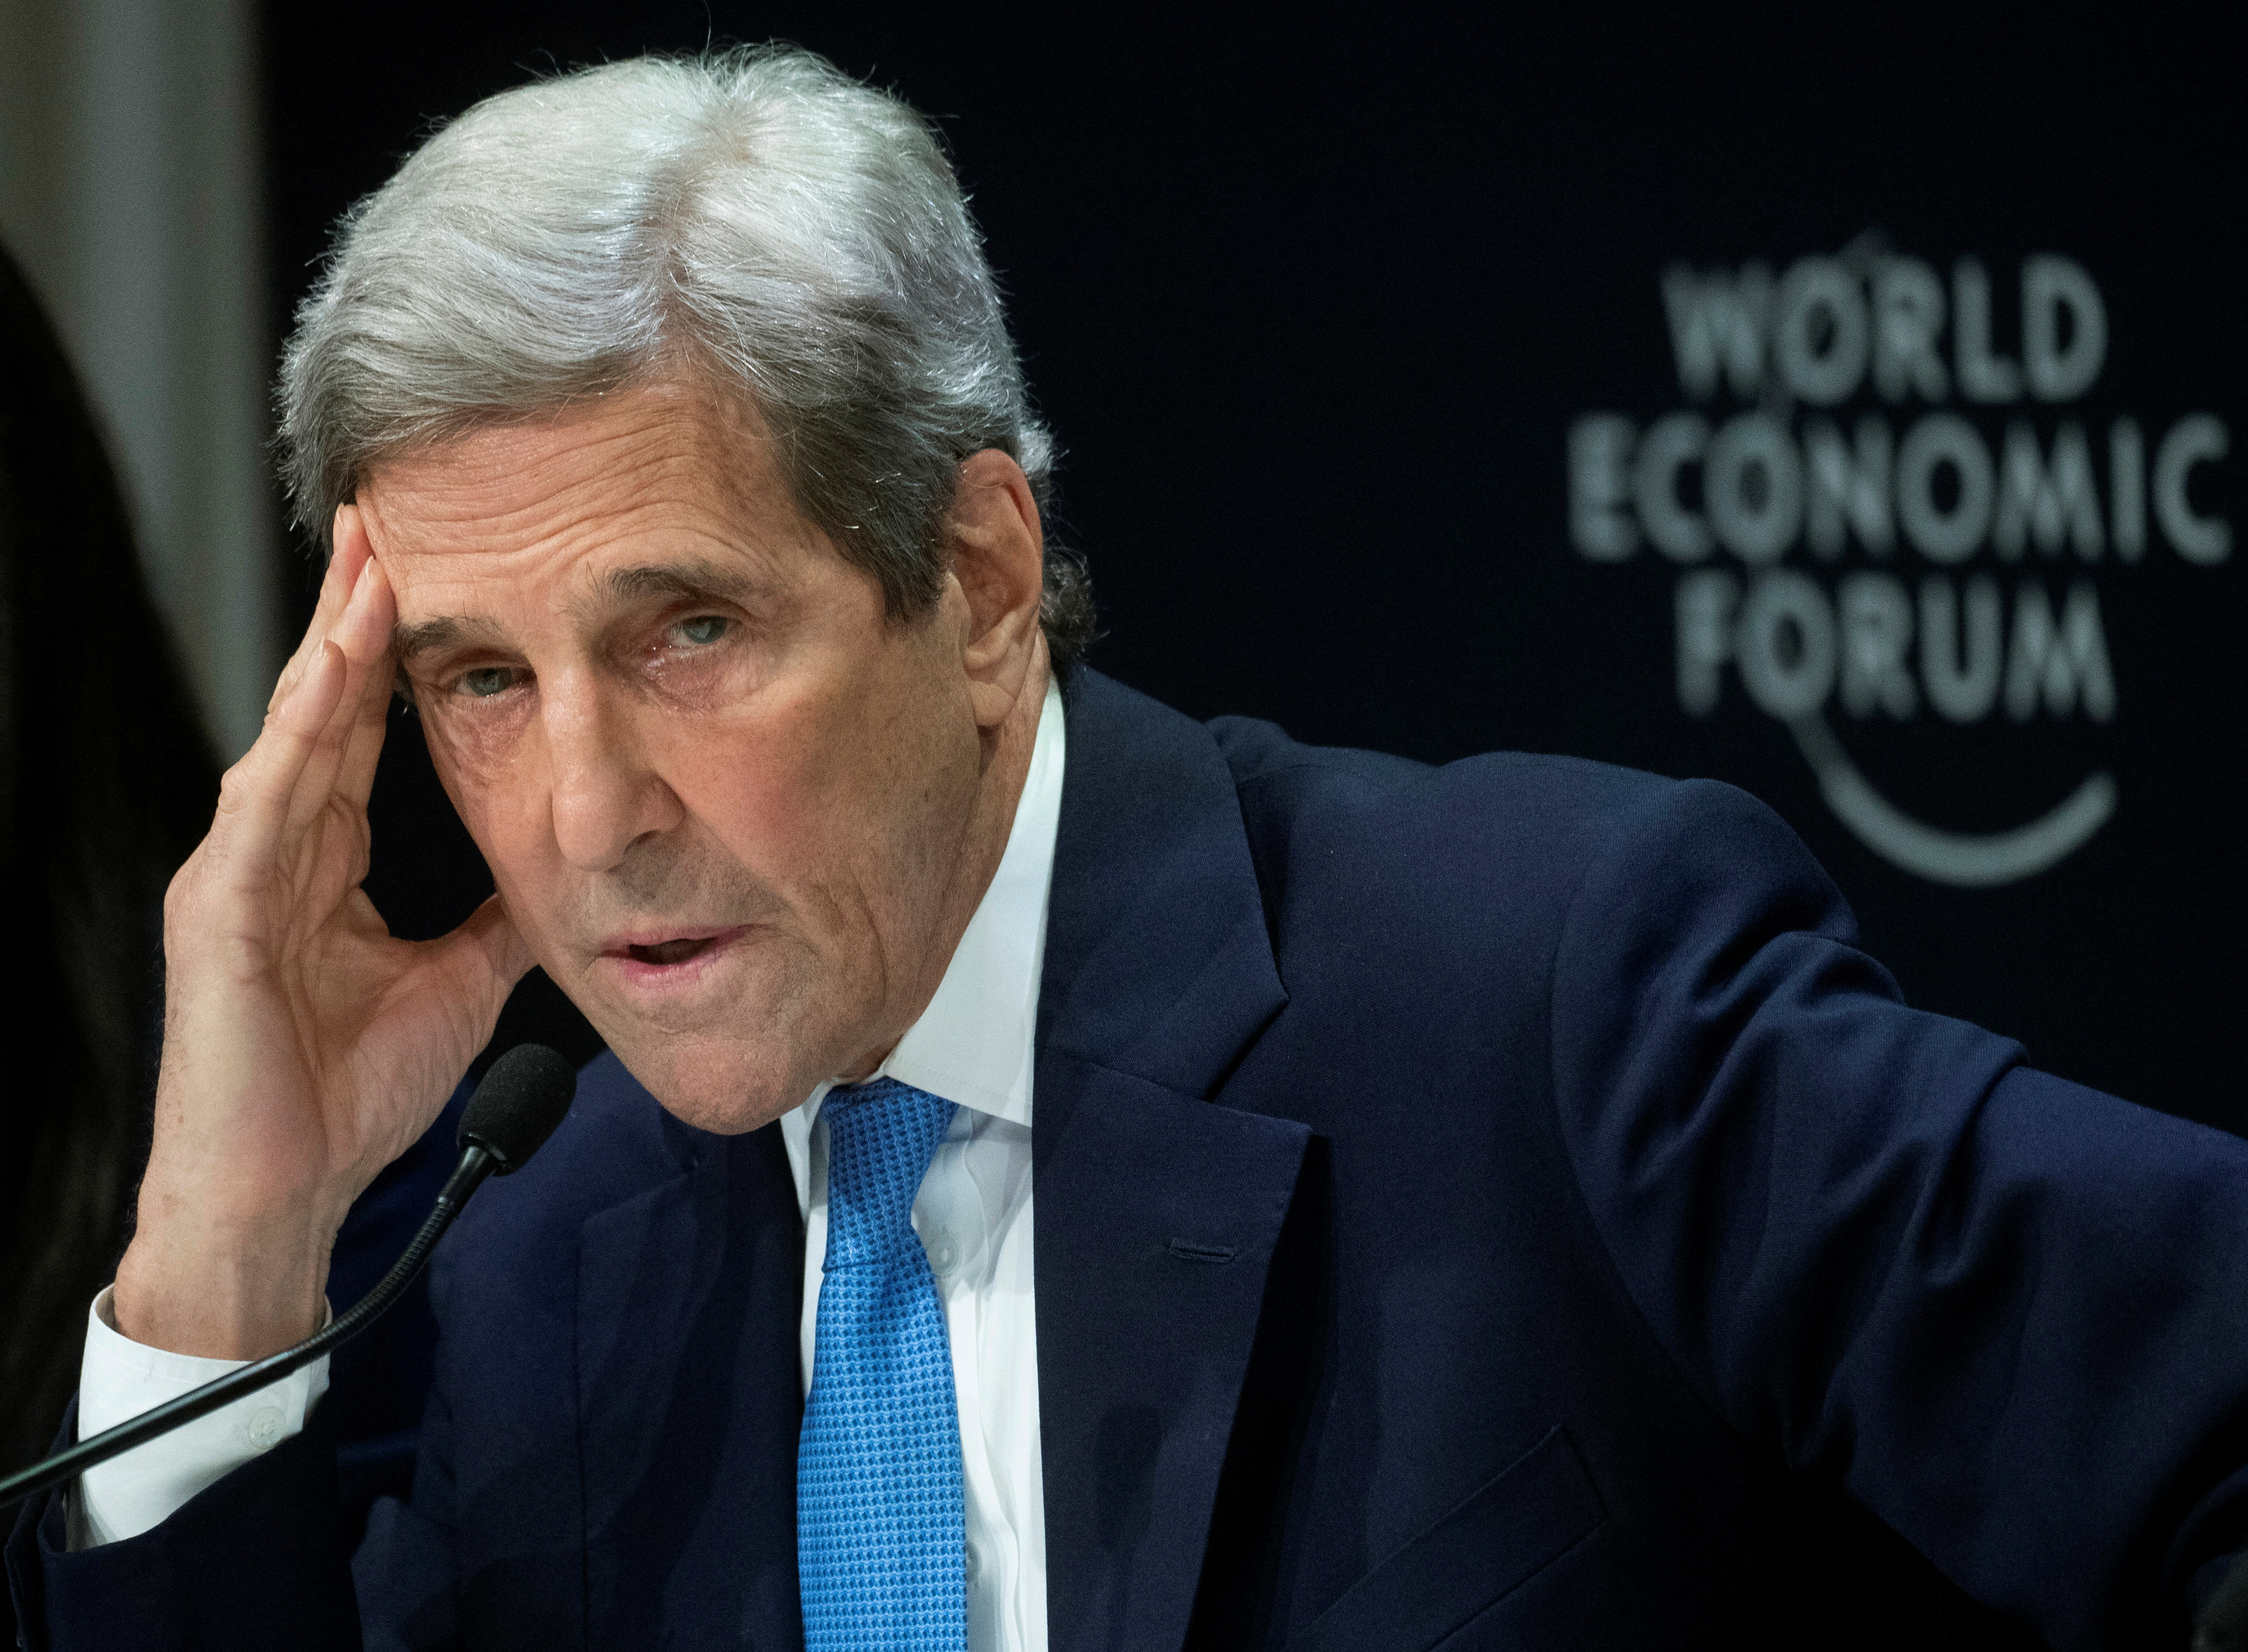 U.S. climate envoy Kerry at a news conference at the World Economic Forum 2022 in Davos